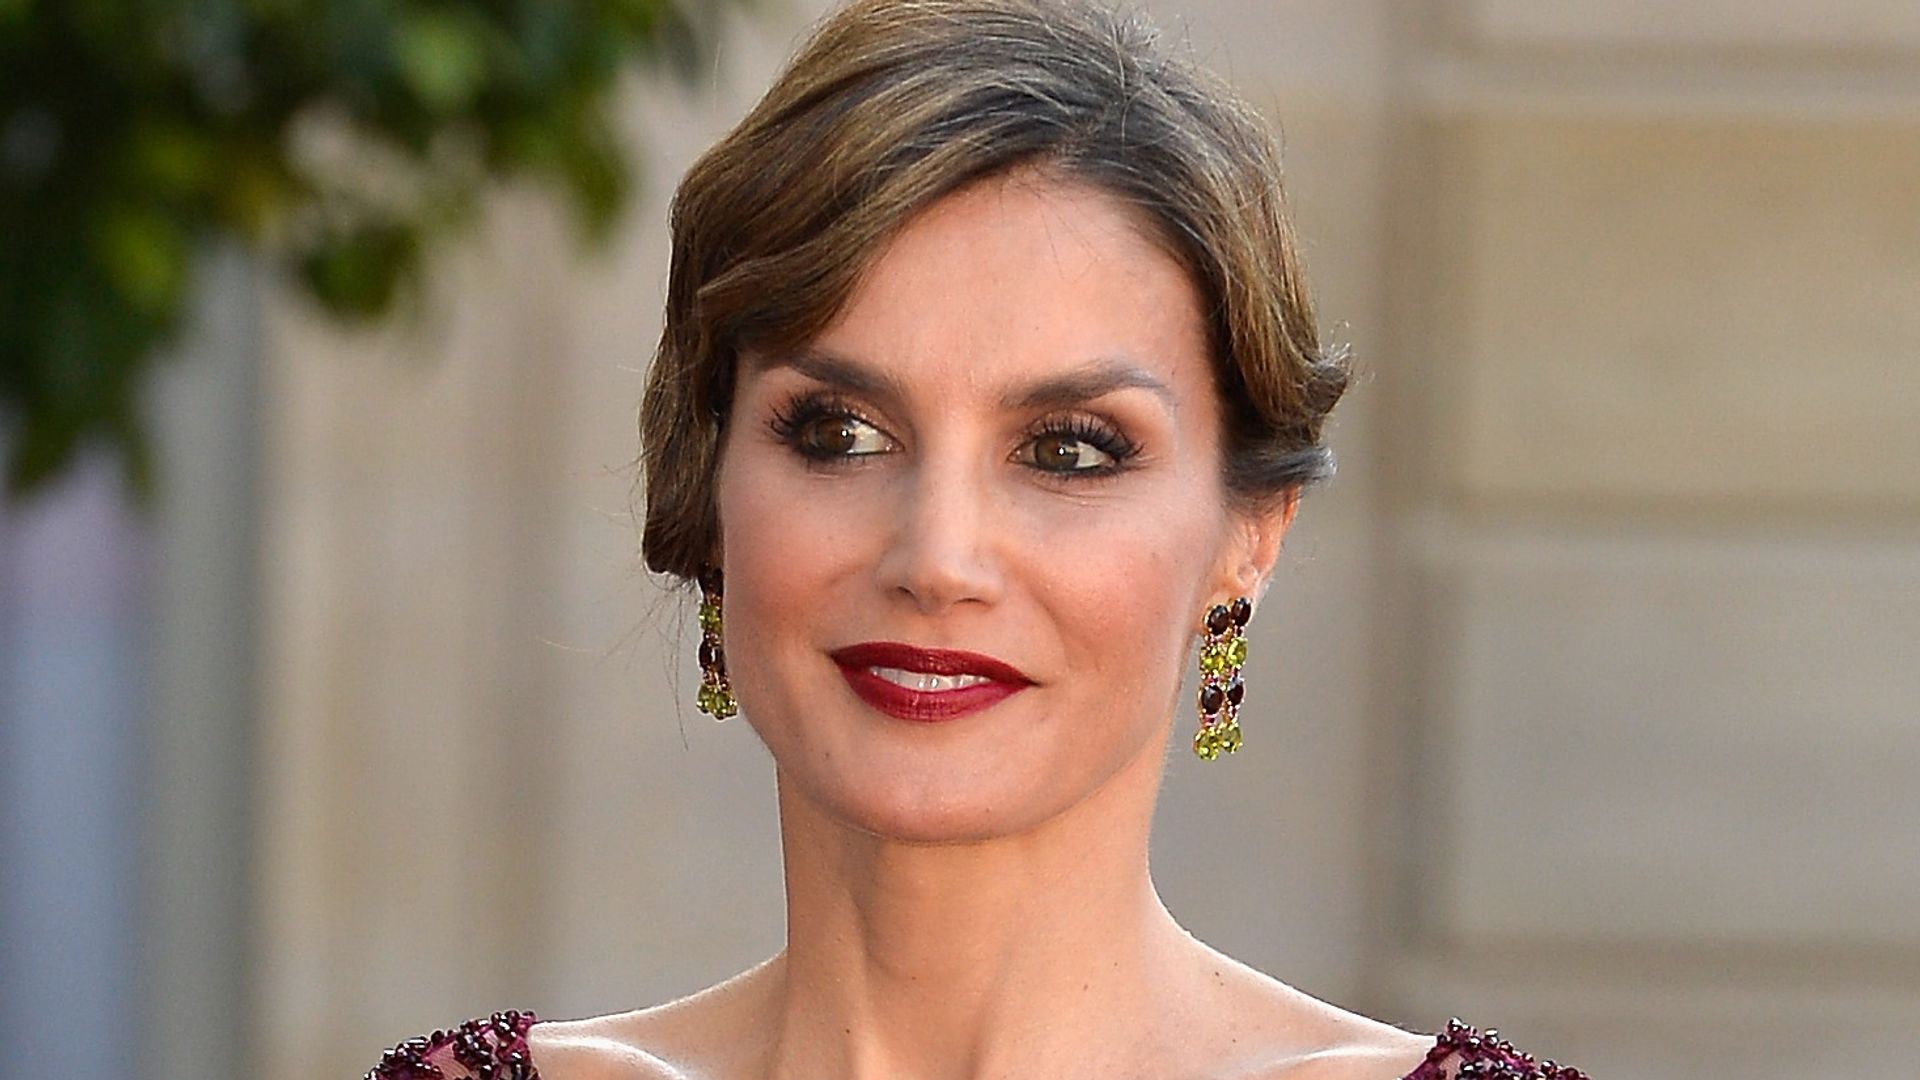 Queen Letizia of Spain in a red dress at the State Dinner offered by French President in 2015